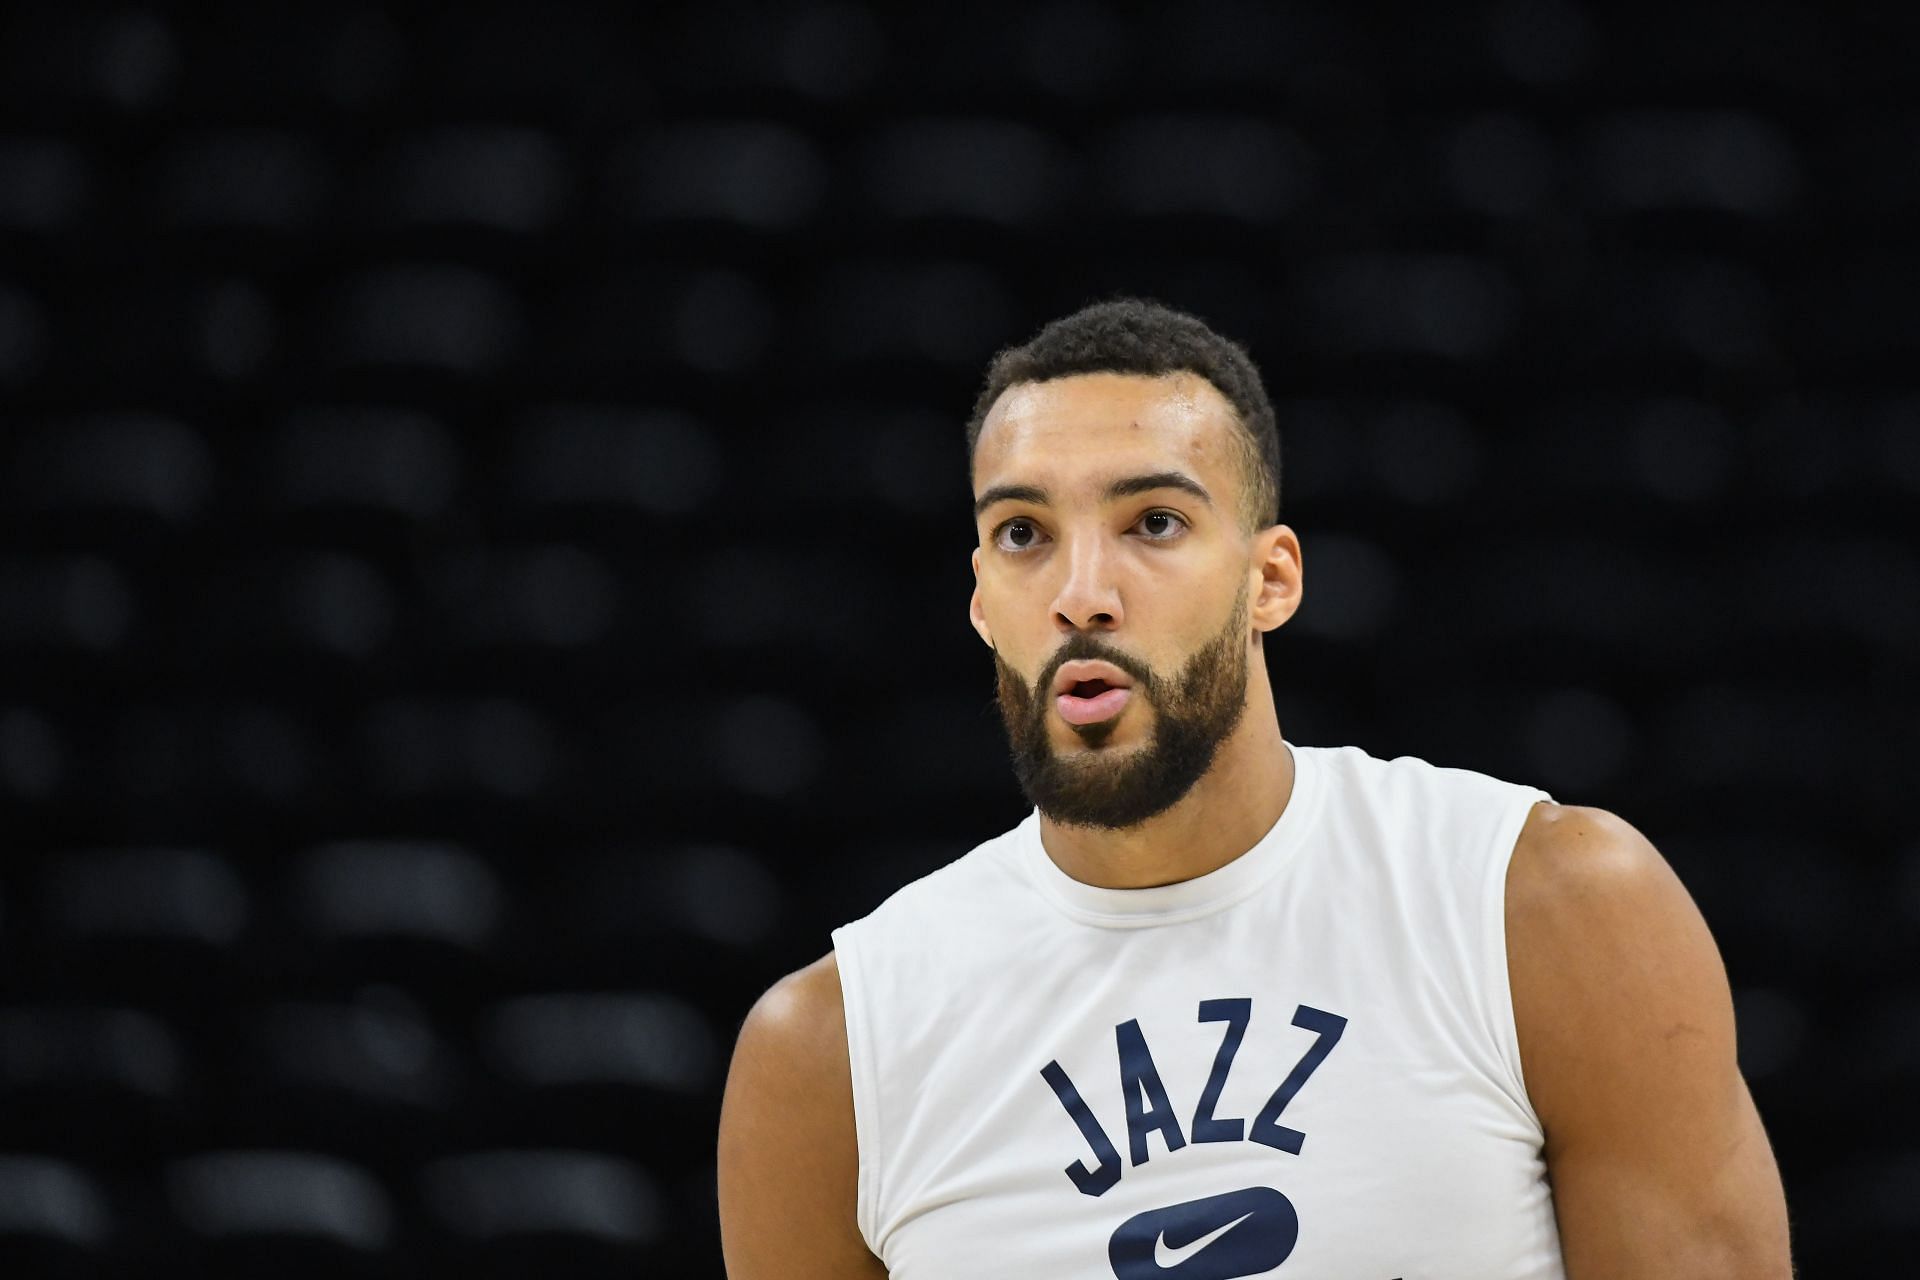 The Toronto Raptors are reportedly interested in trading for Rudy Gobert if he is made available.